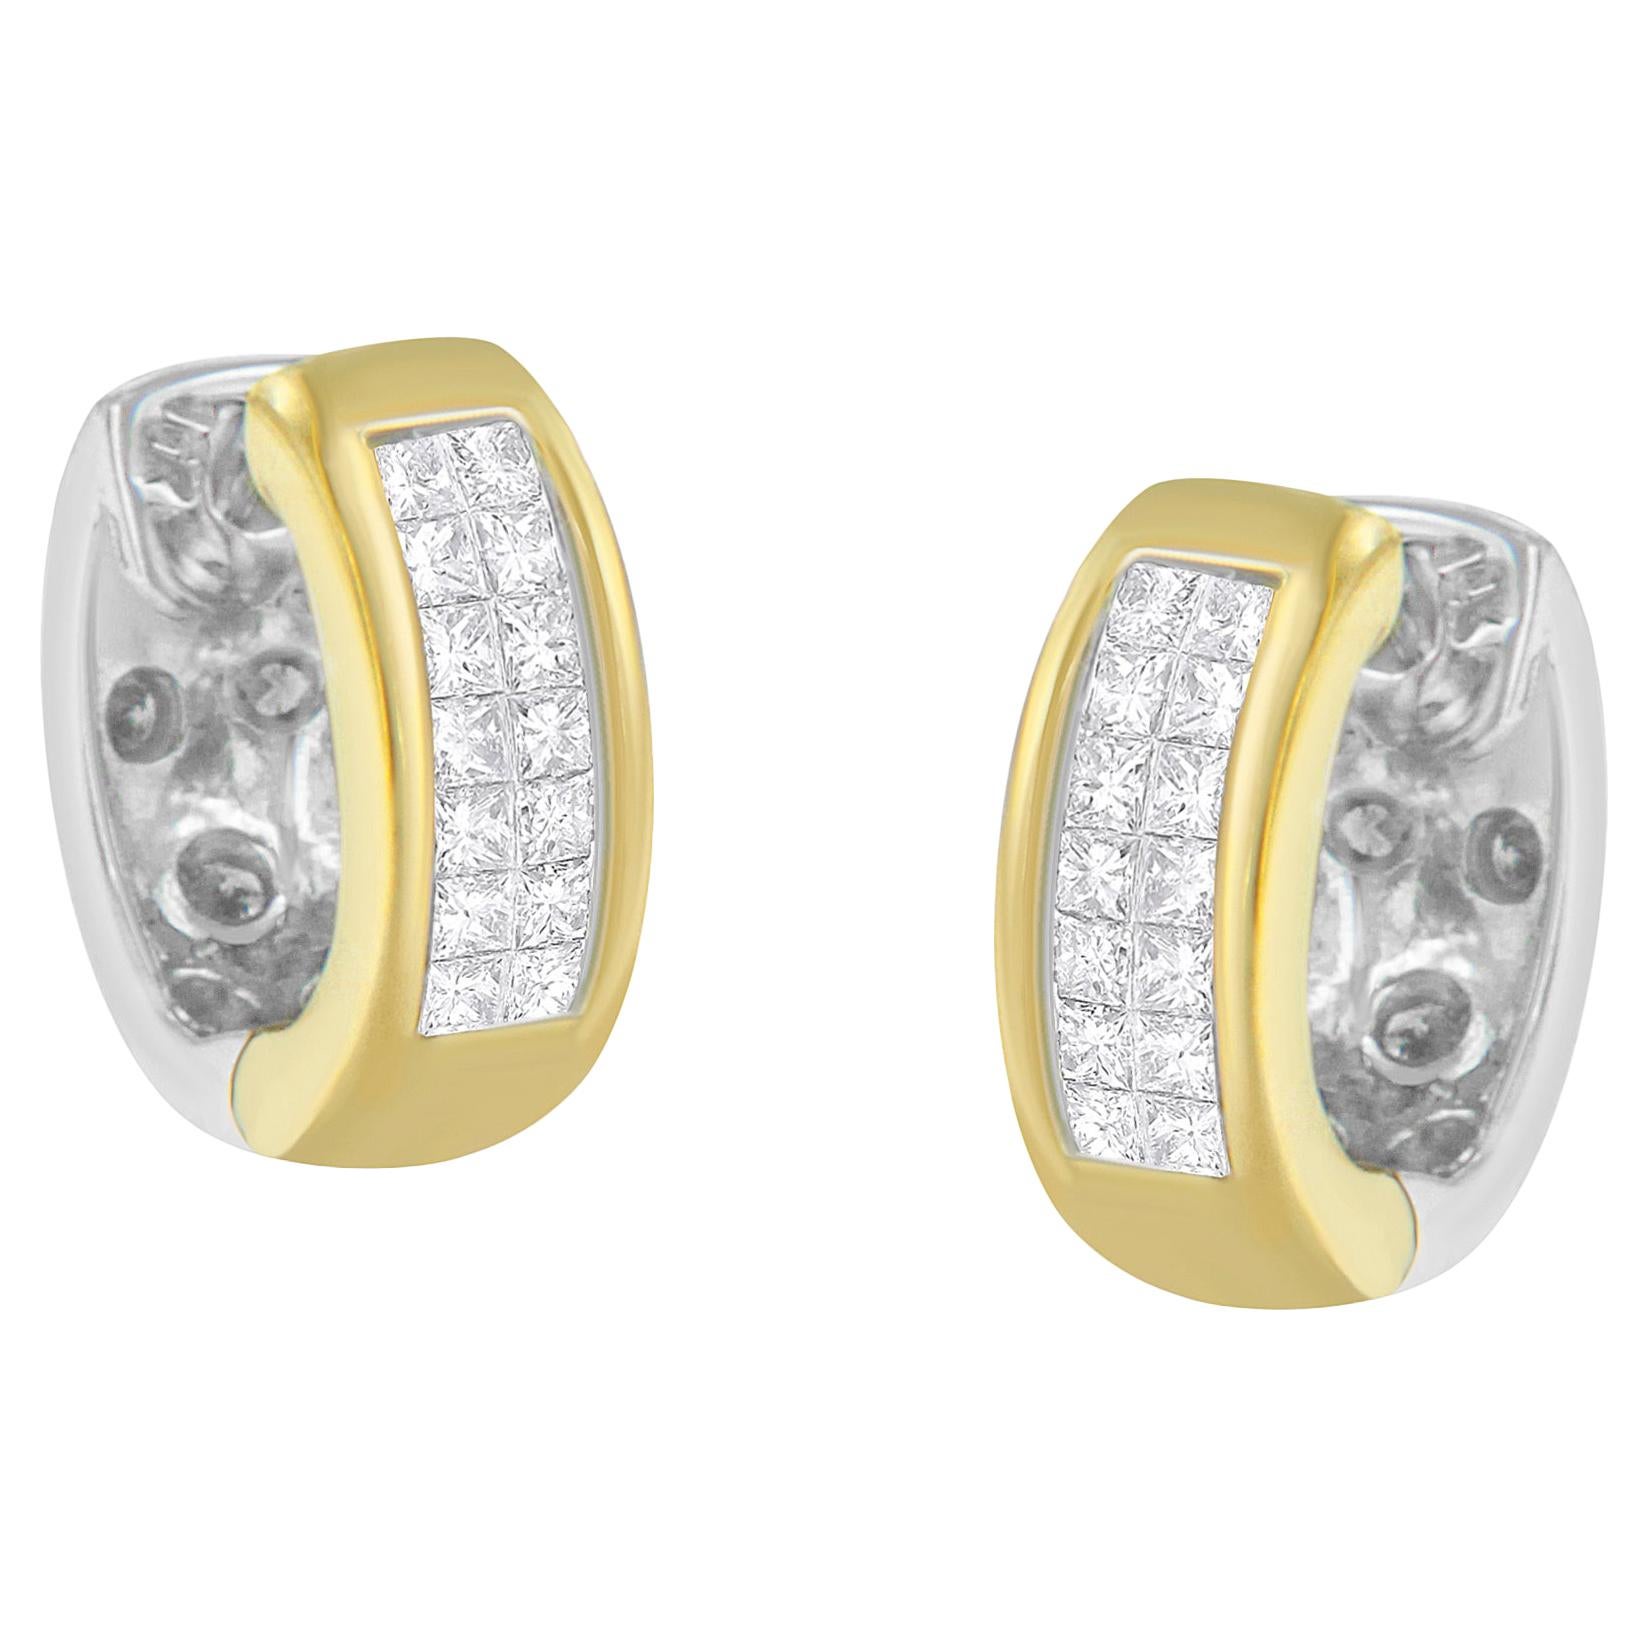 14k Two Toned Gold 1 2 Carat Round And Princess Cut Diamond Earrings